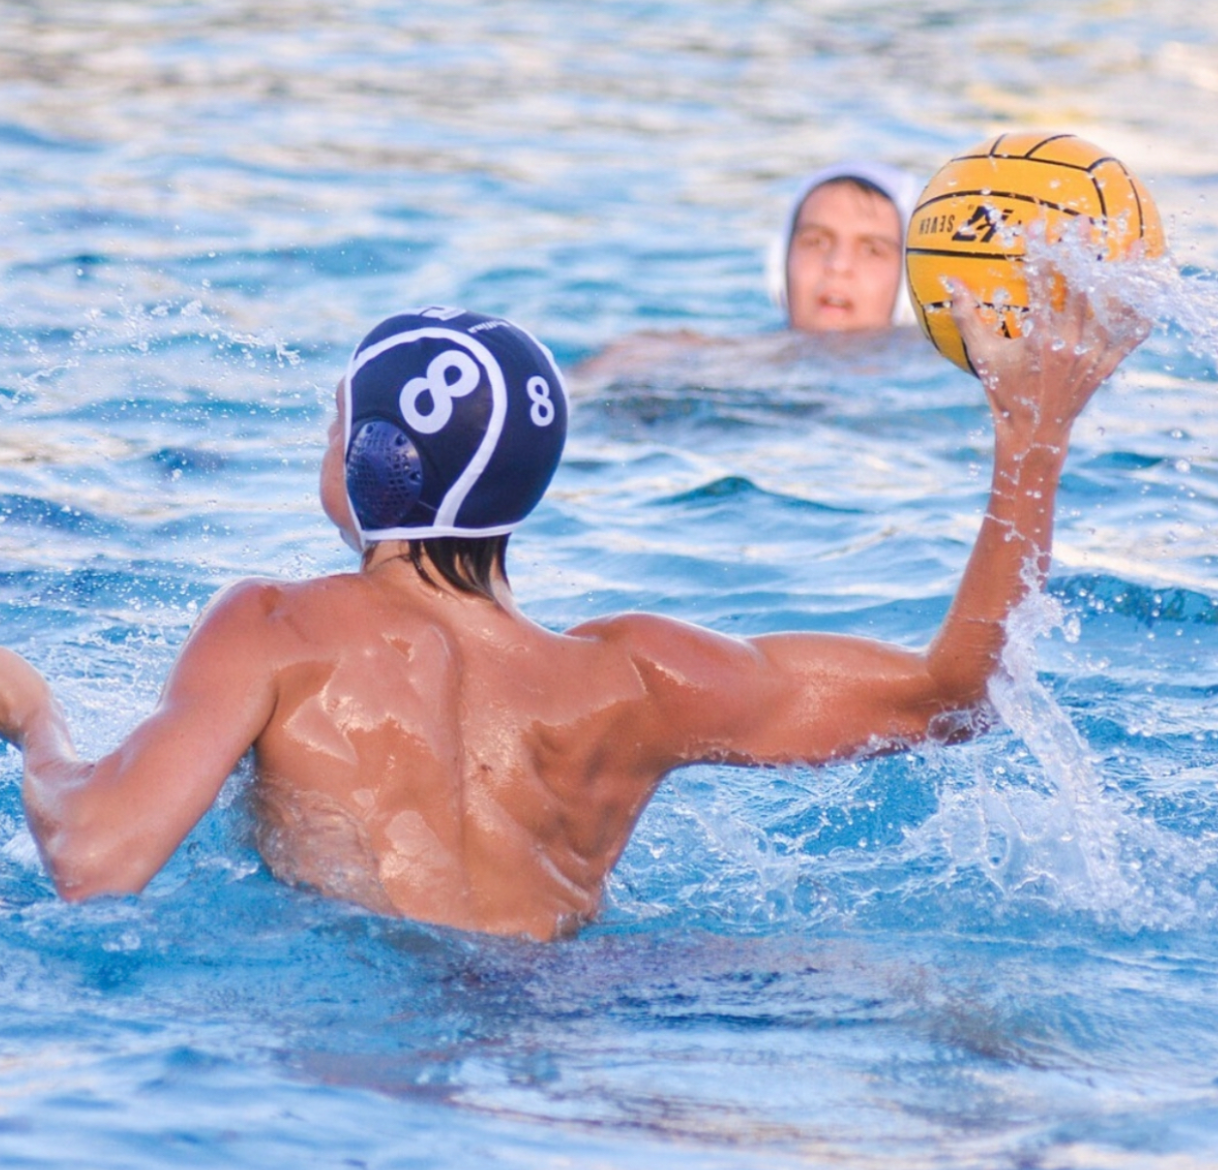 Senior Captain Gabe Lewis Shines in Orlando Water Polo Tournament, Aims for State Championship